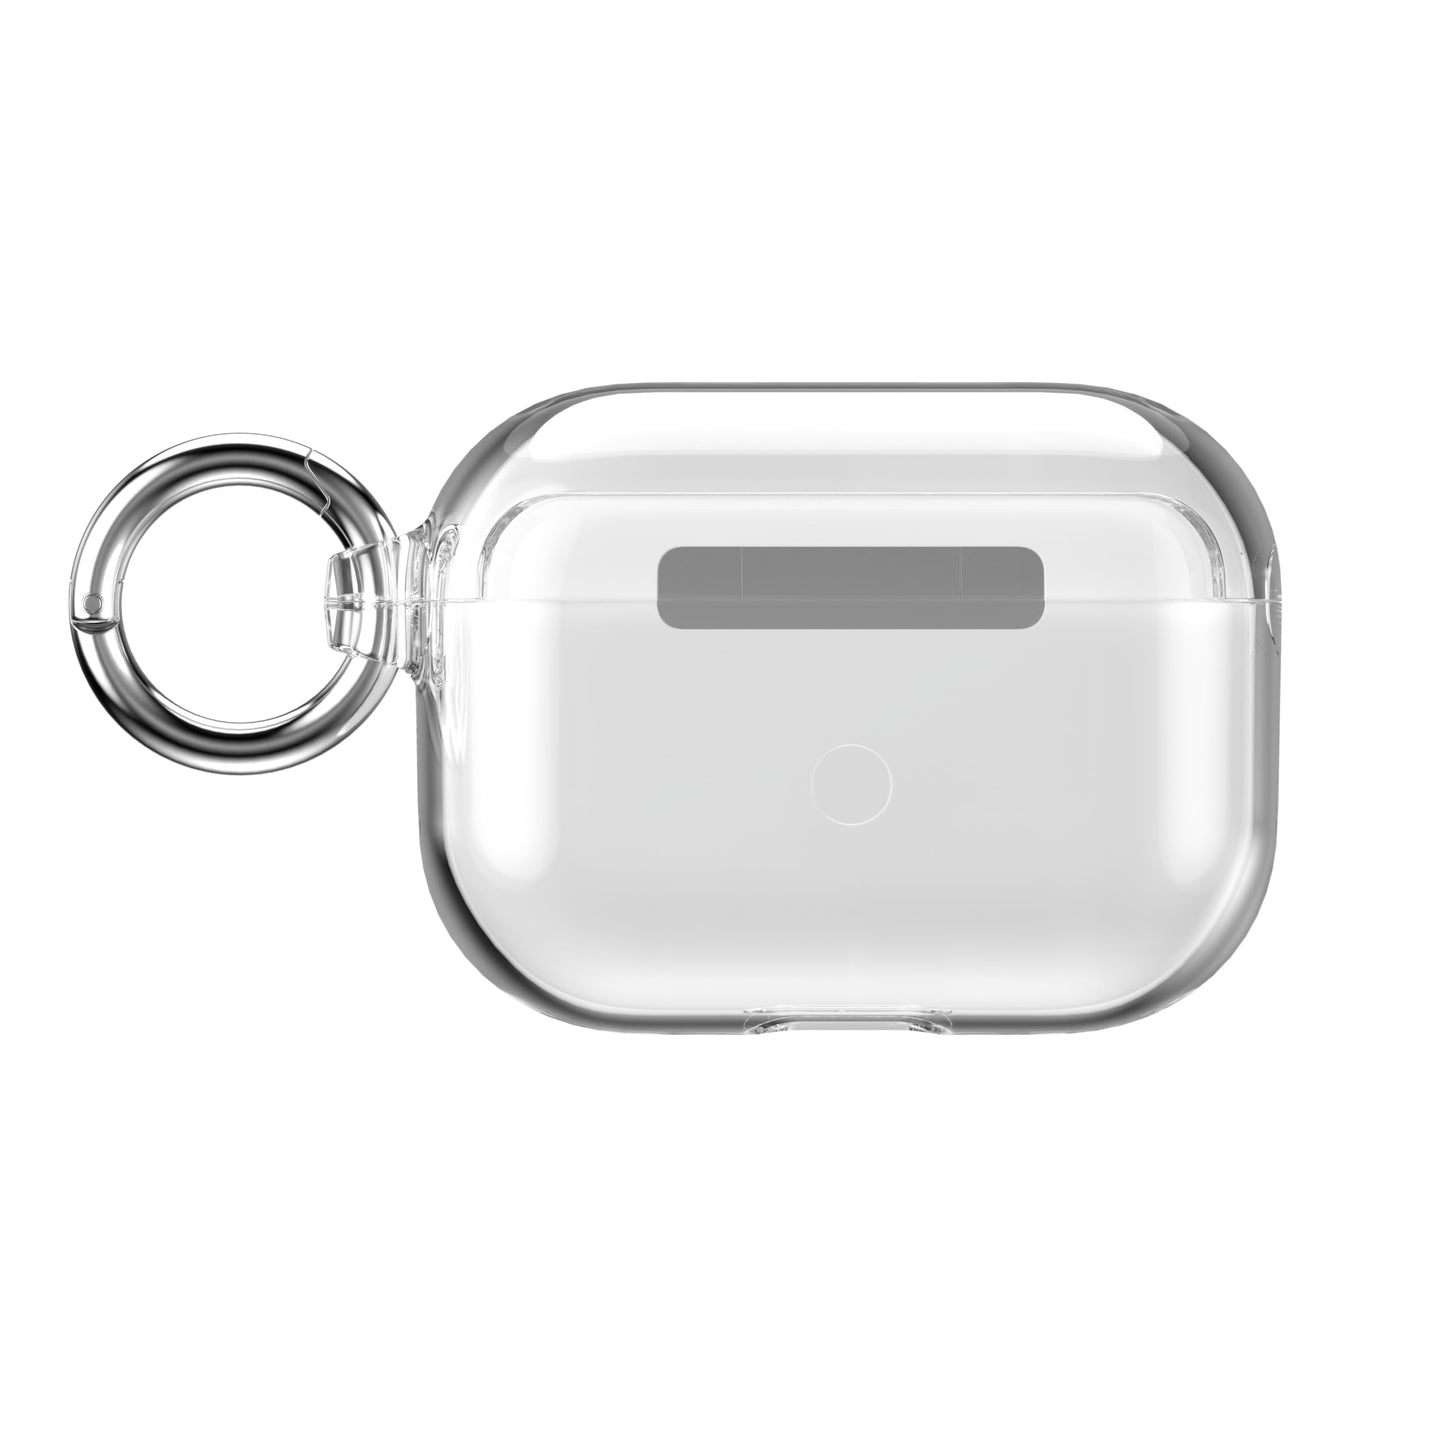 Speck Clear AirPods Pro Case - for Apple AirPods Pro 1st Gen & AirPods Pro 2nd Gen - Scratch-Resistant Coating with Carabiner Attachment - Presidio Clear